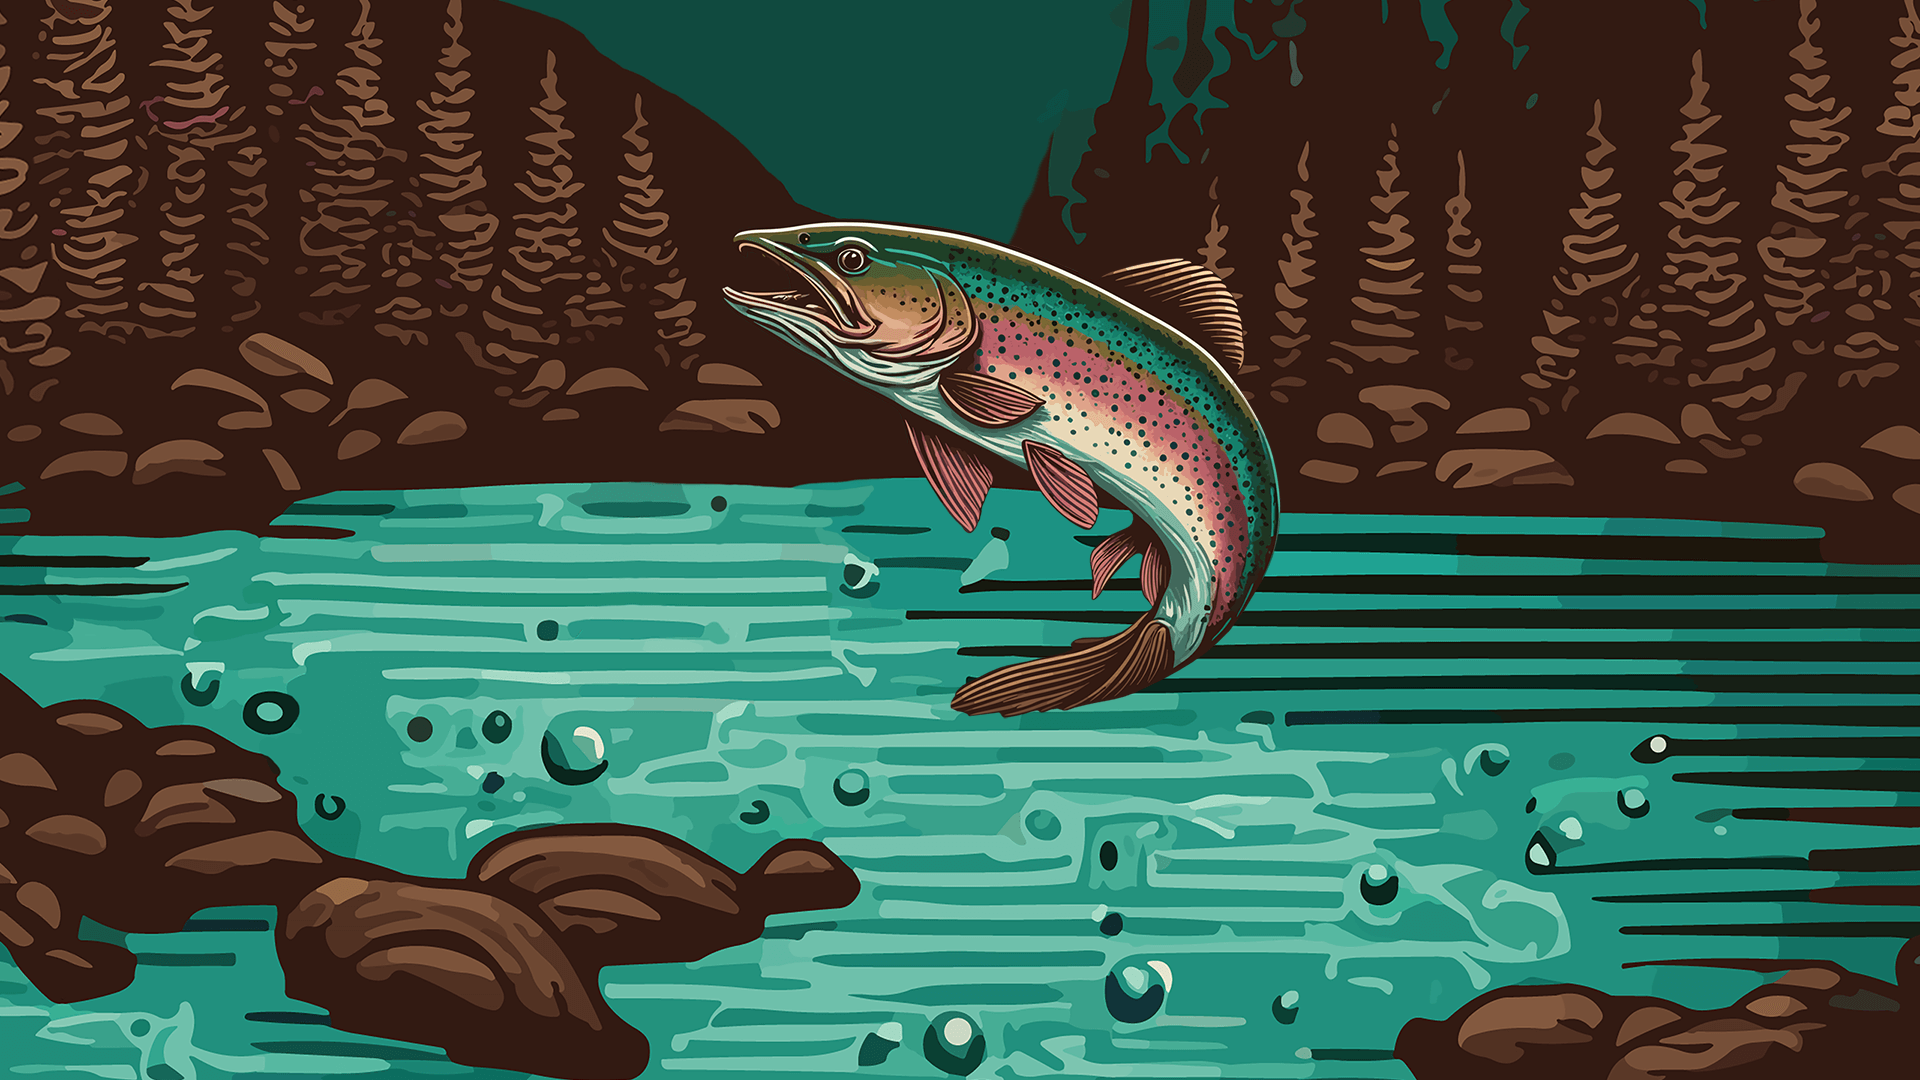 Digital art of a cartoon trout jumping out of a lake.